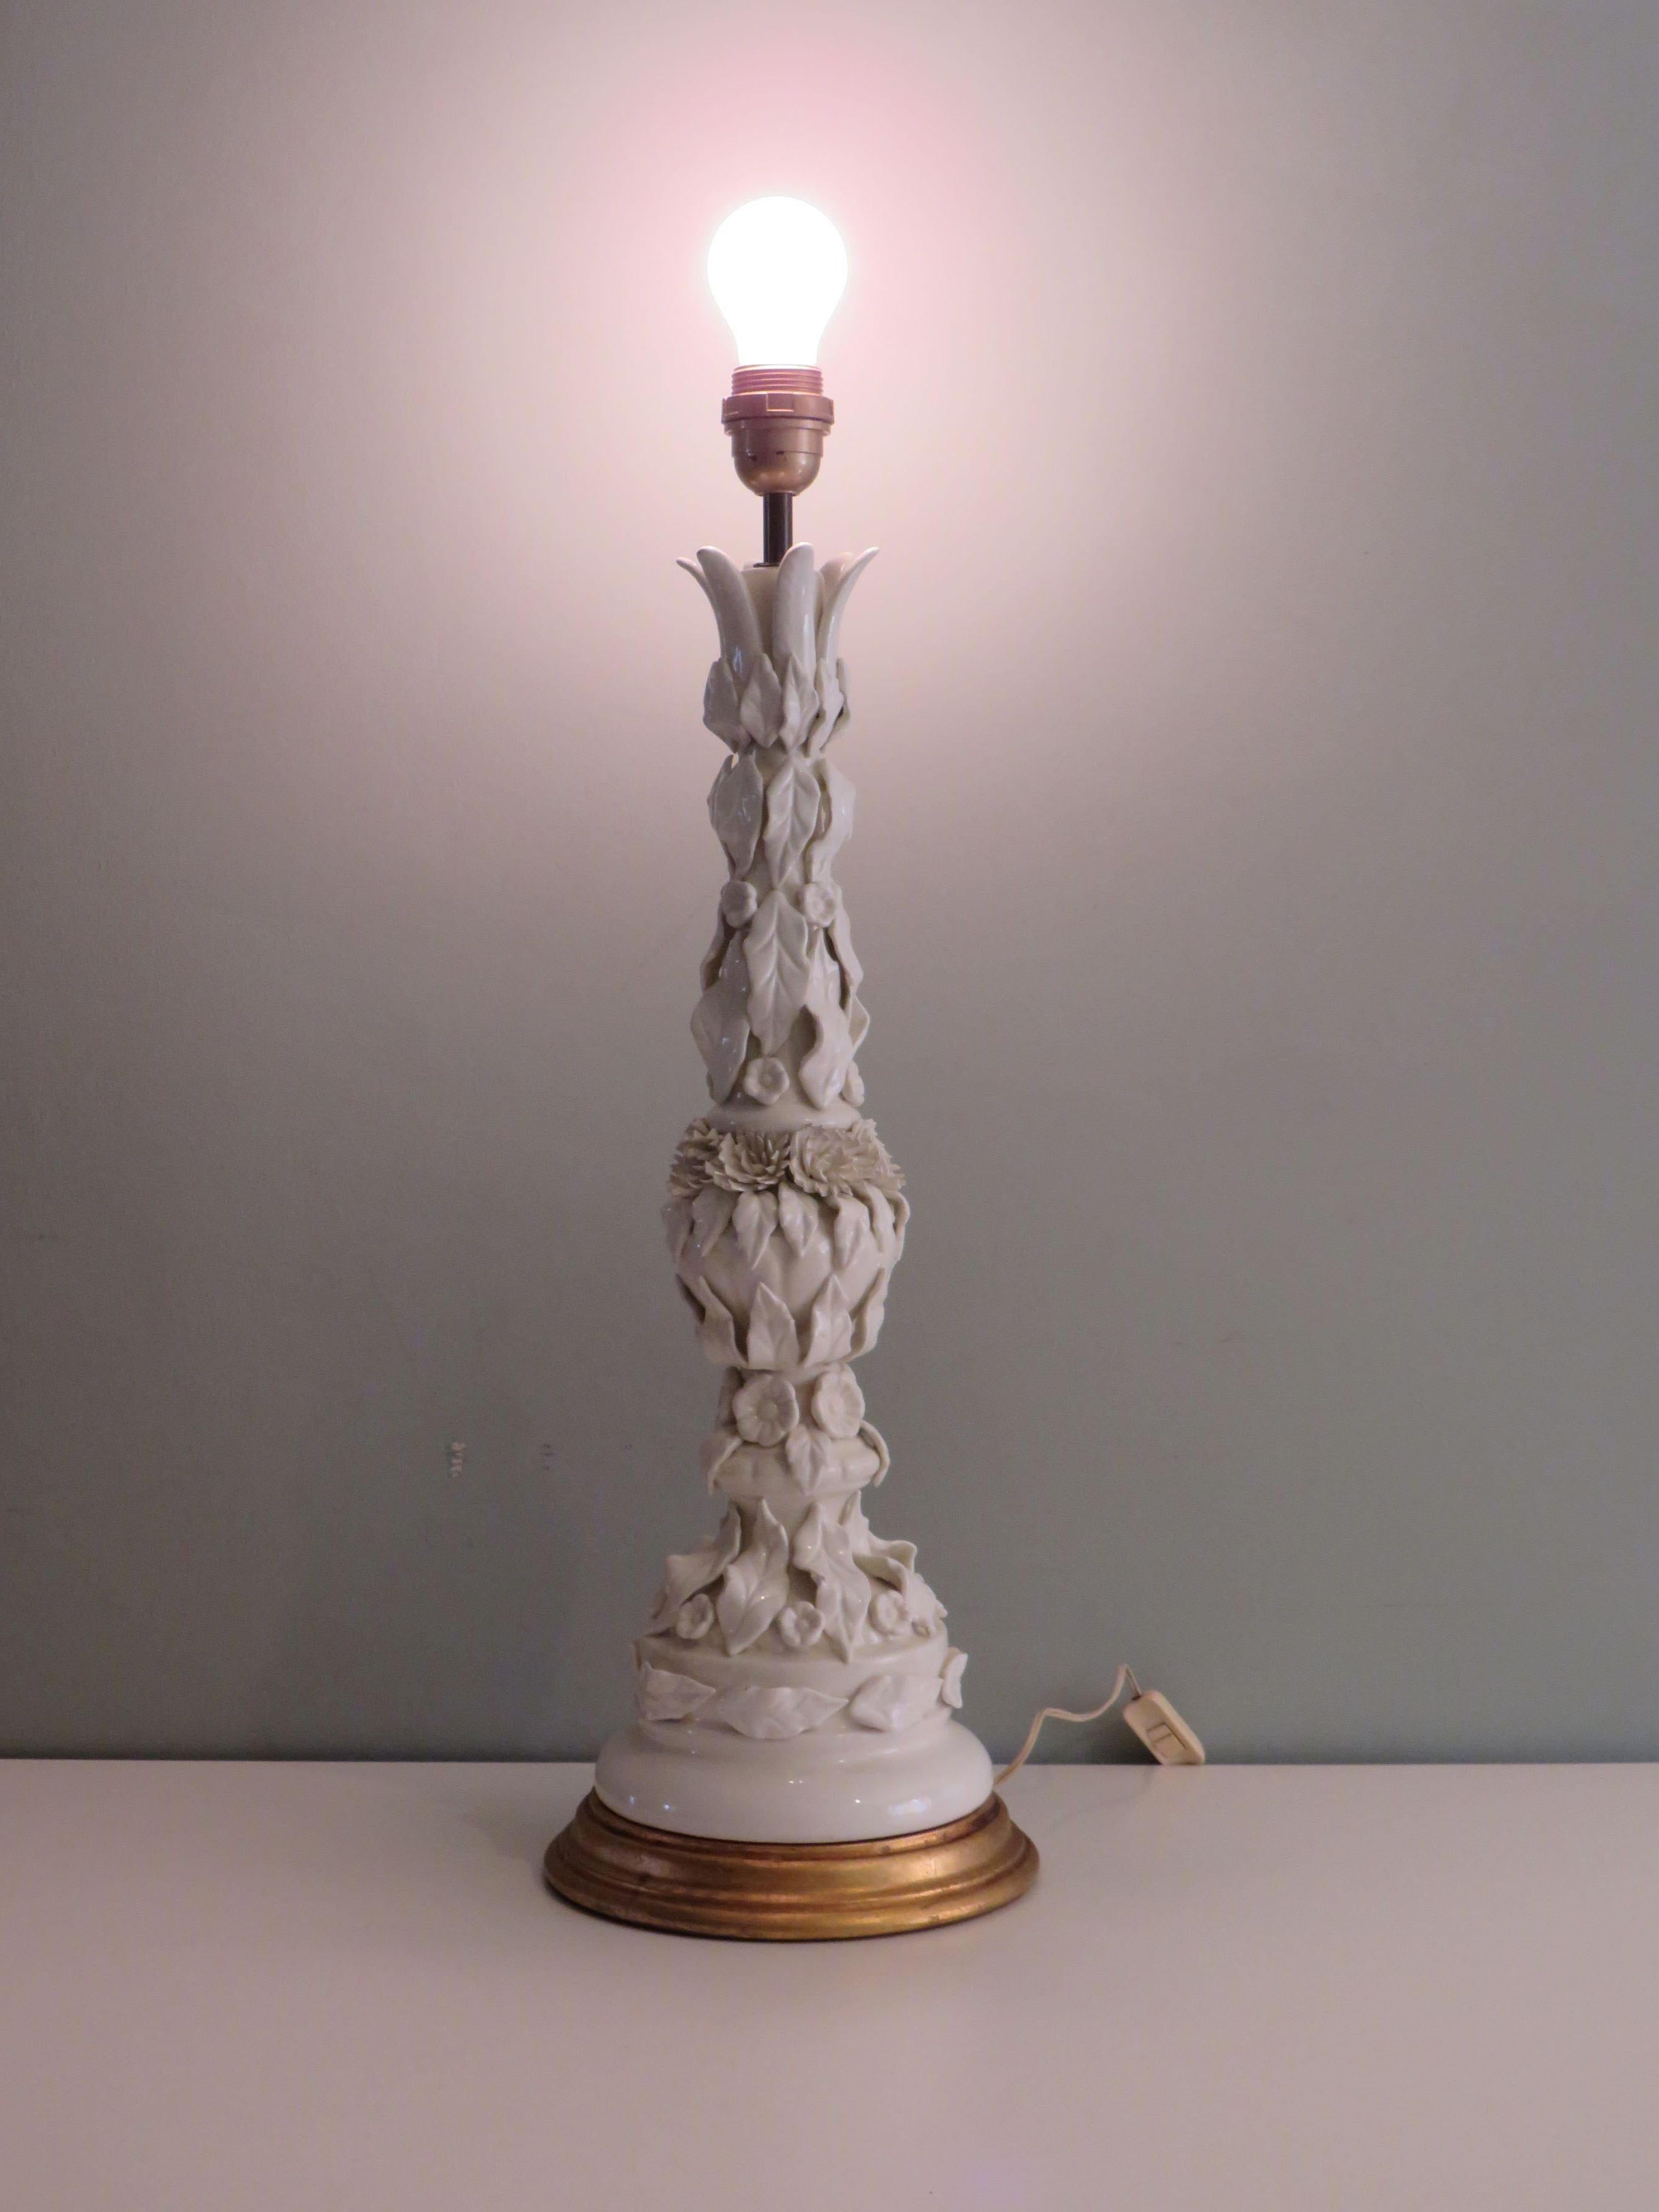 Large table lamp made of white glossy ceramic, lavishly decorated with leaf and floral motifs.
The lamp base is made of gilded wood.
There is an on and off button and 1 E 27 fitting.
Upon delivery to the US, an intermediate plug will be included